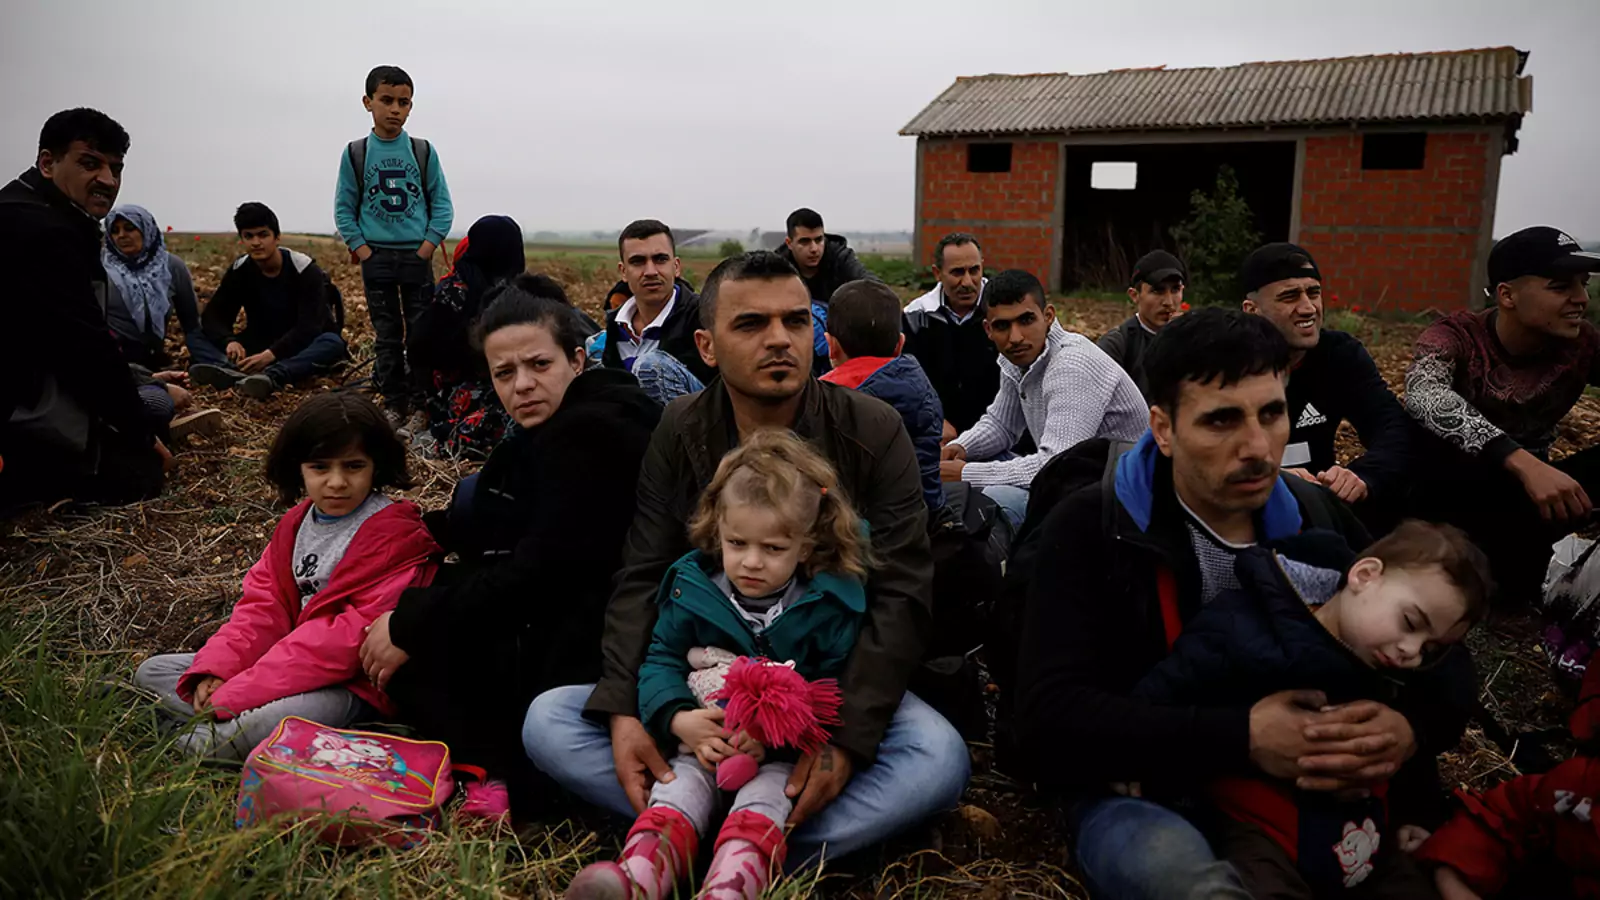 Syrian refugees who crossed the Evros River wait to be transferred by police to a first reception center in Greece.